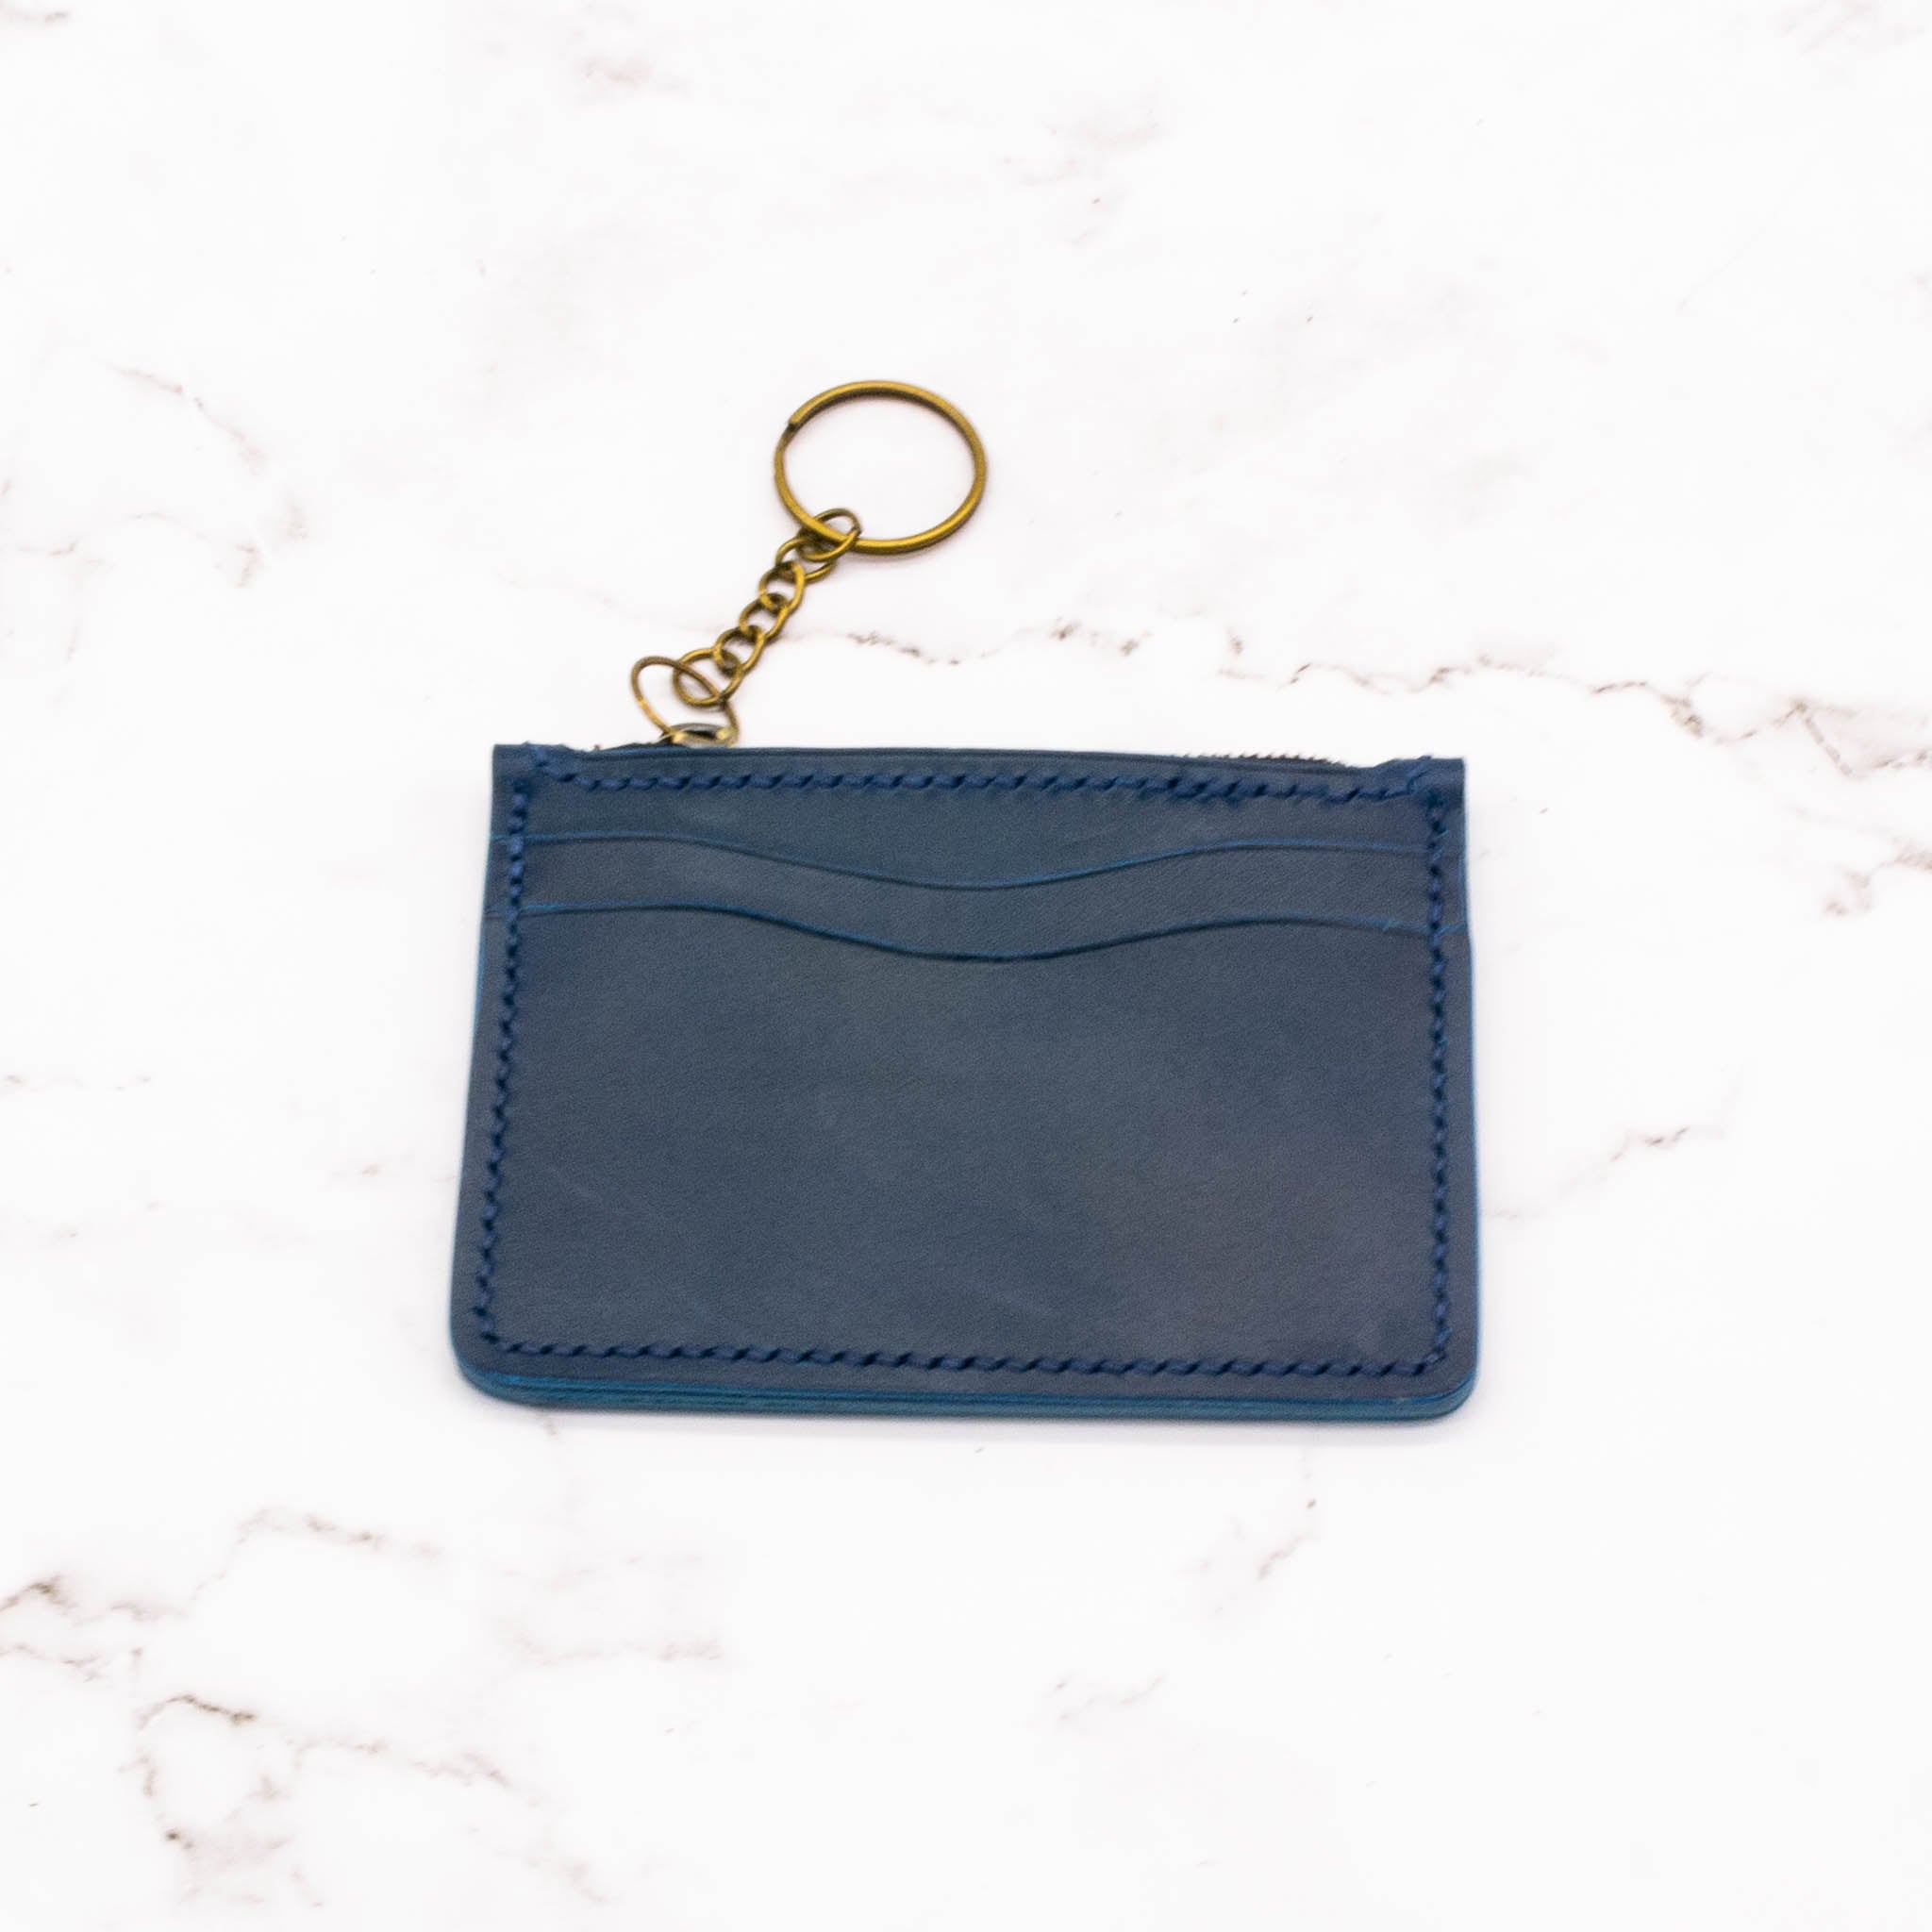 Short Leather Wallet with Top Zipper and Key Ring